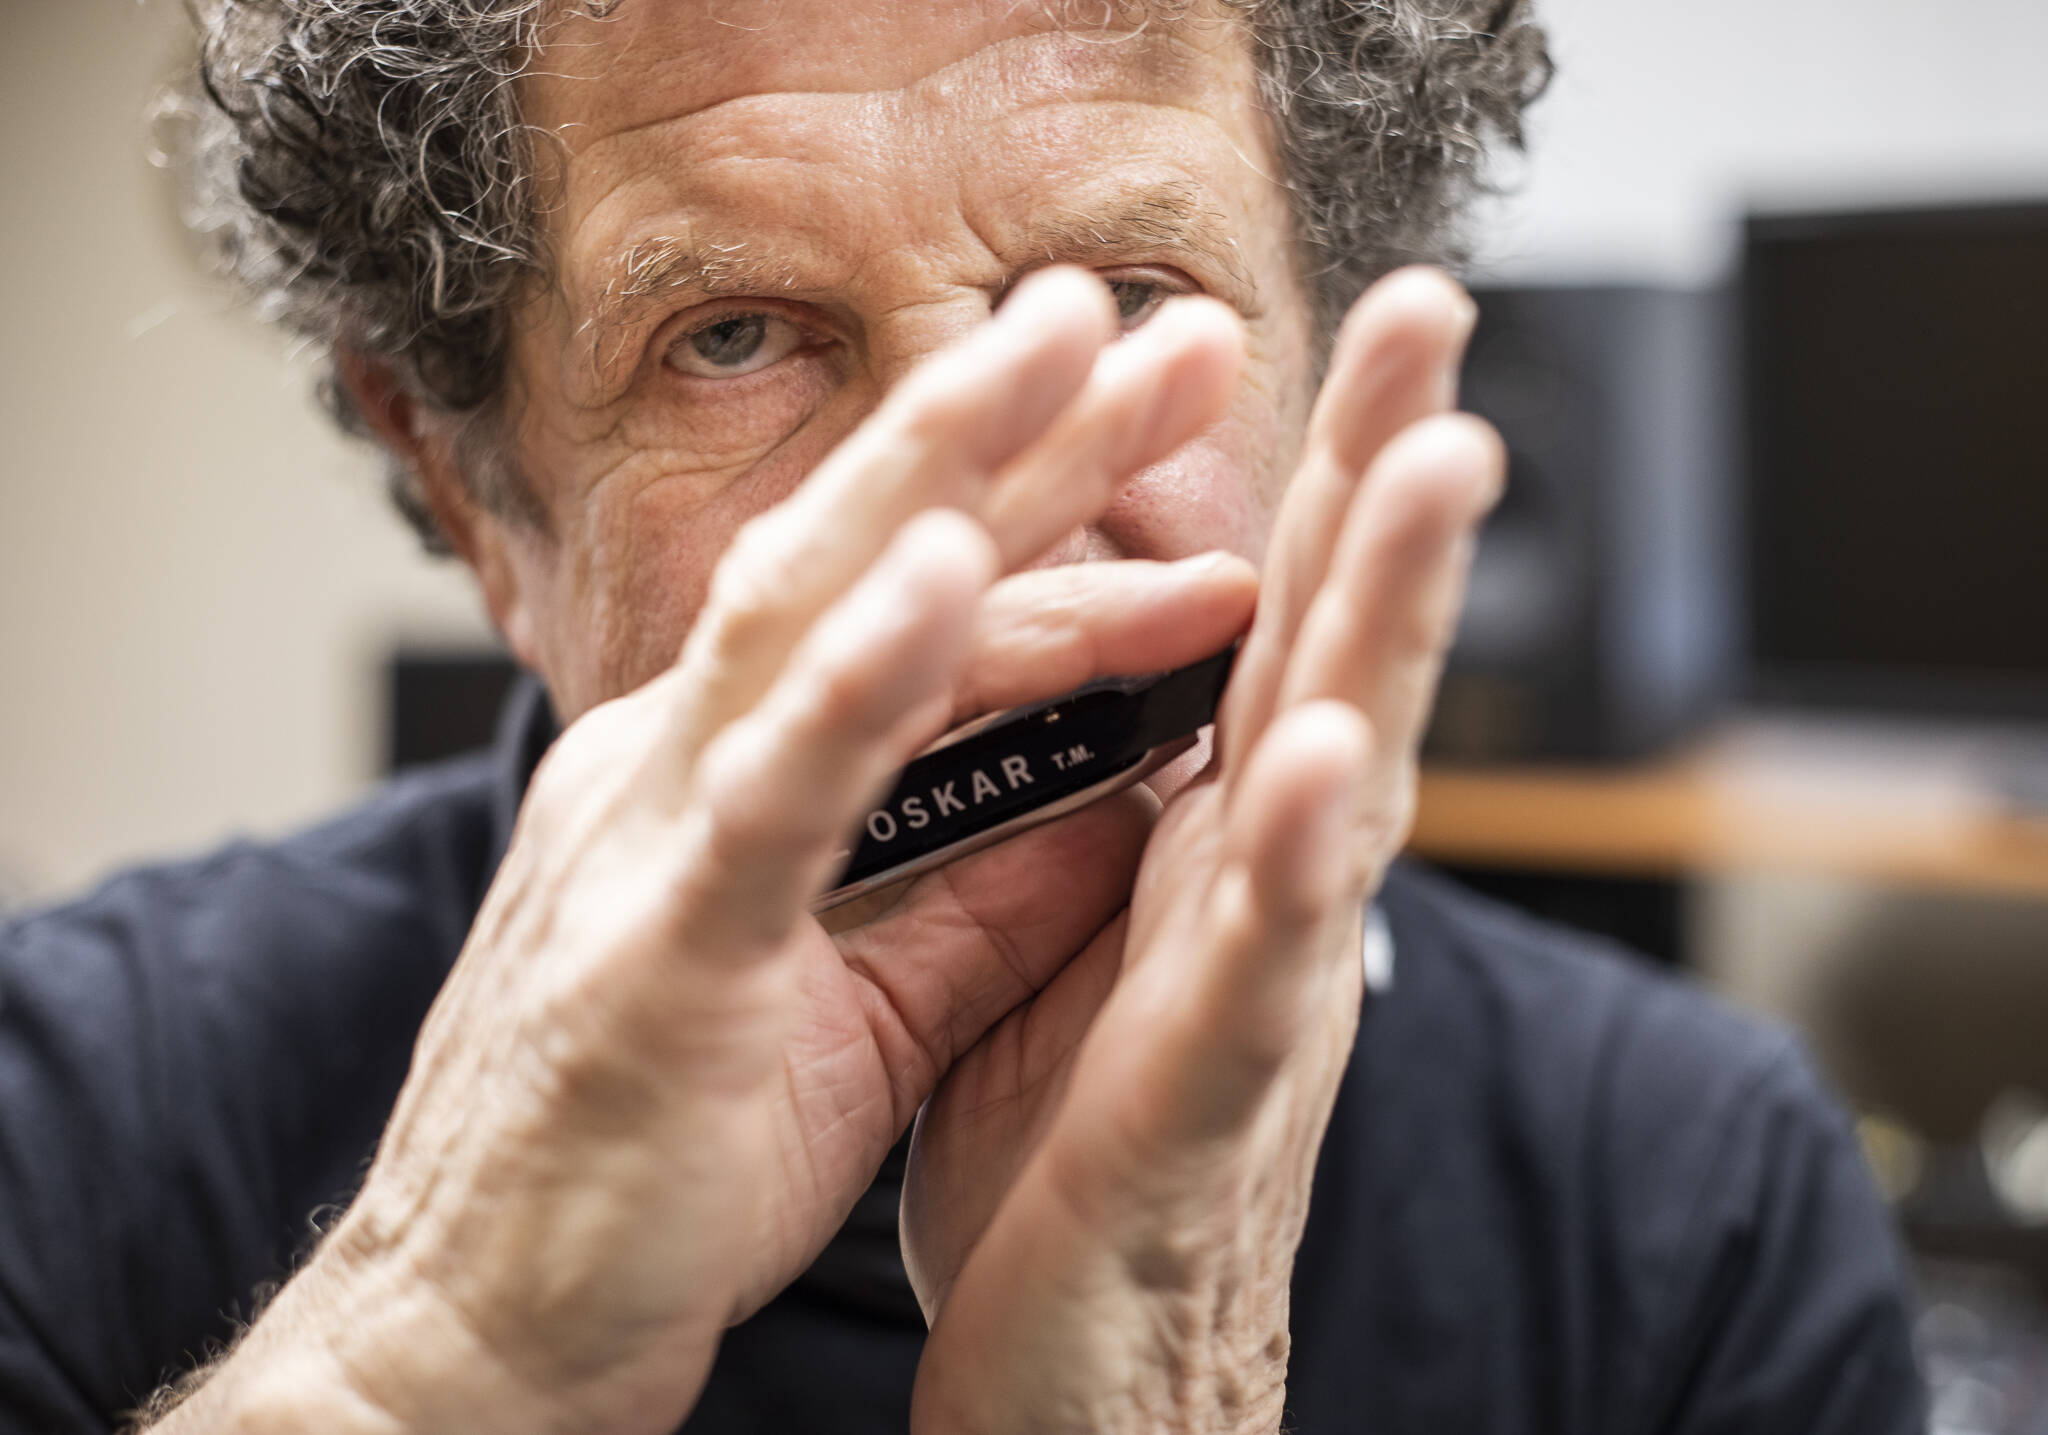 Lee Oskar plays one of his custom harmonicas in his recording studio at his Everett home. (Olivia Vanni / The Herald)